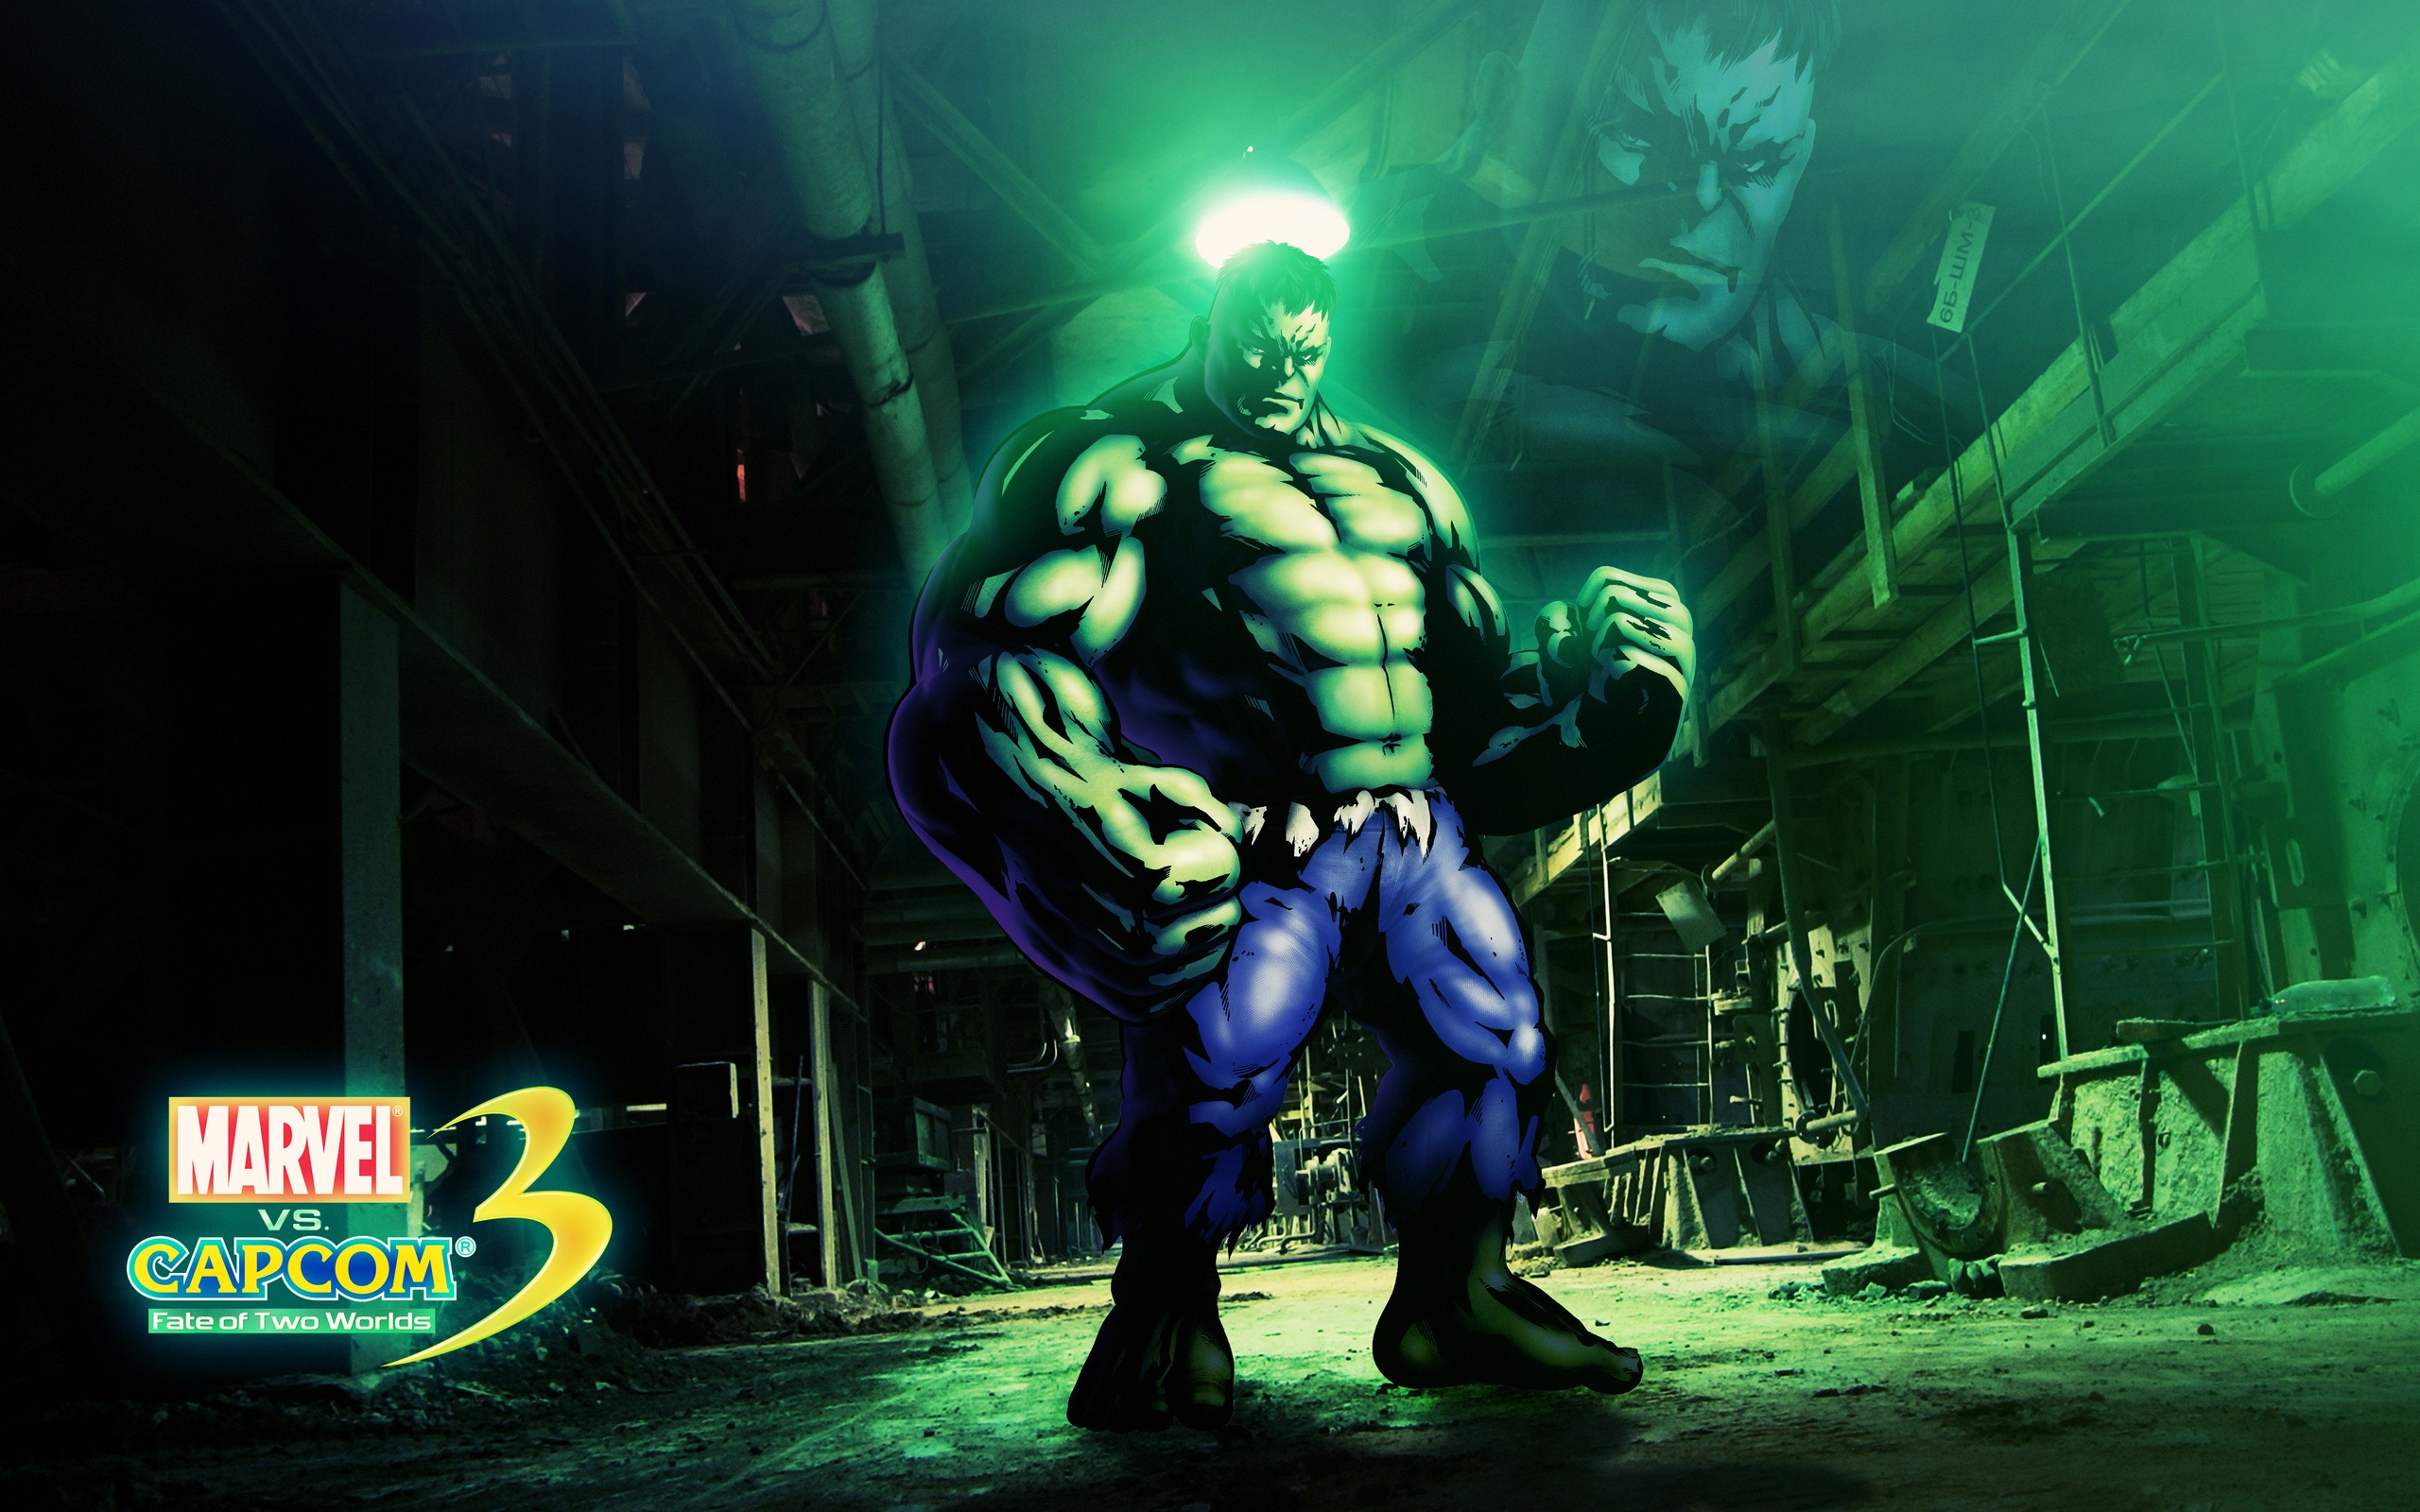 Marvel VS. Capcom 3: Fate of Two Worlds HD game wallpapers #11 - 2560x1600